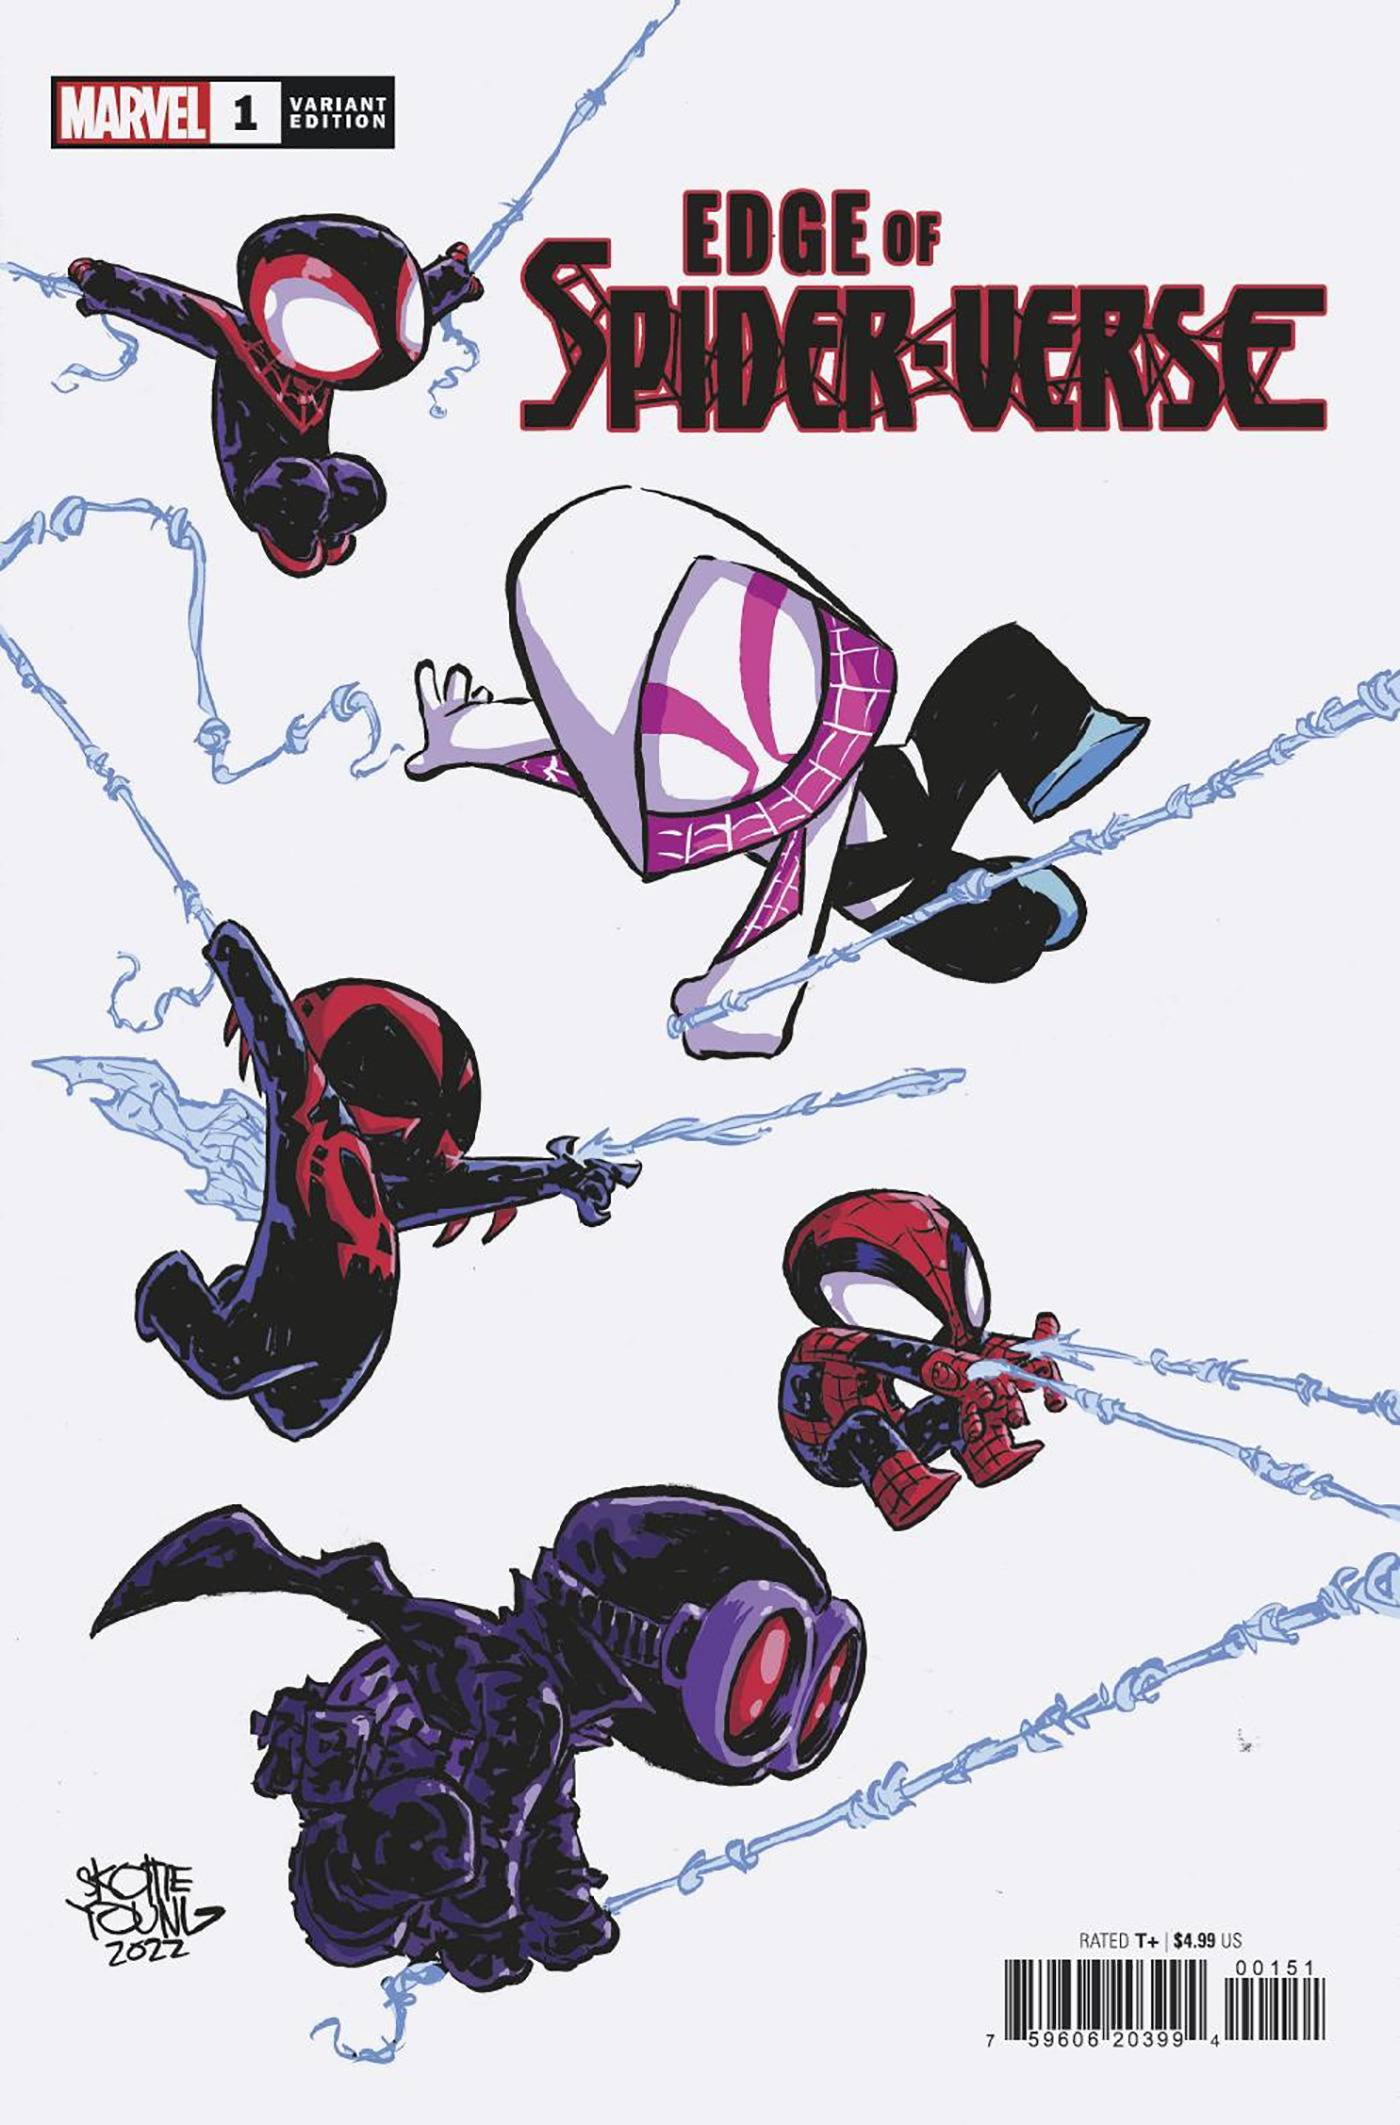 EDGE OF SPIDER-VERSE #1 (OF 5) YOUNG VAR